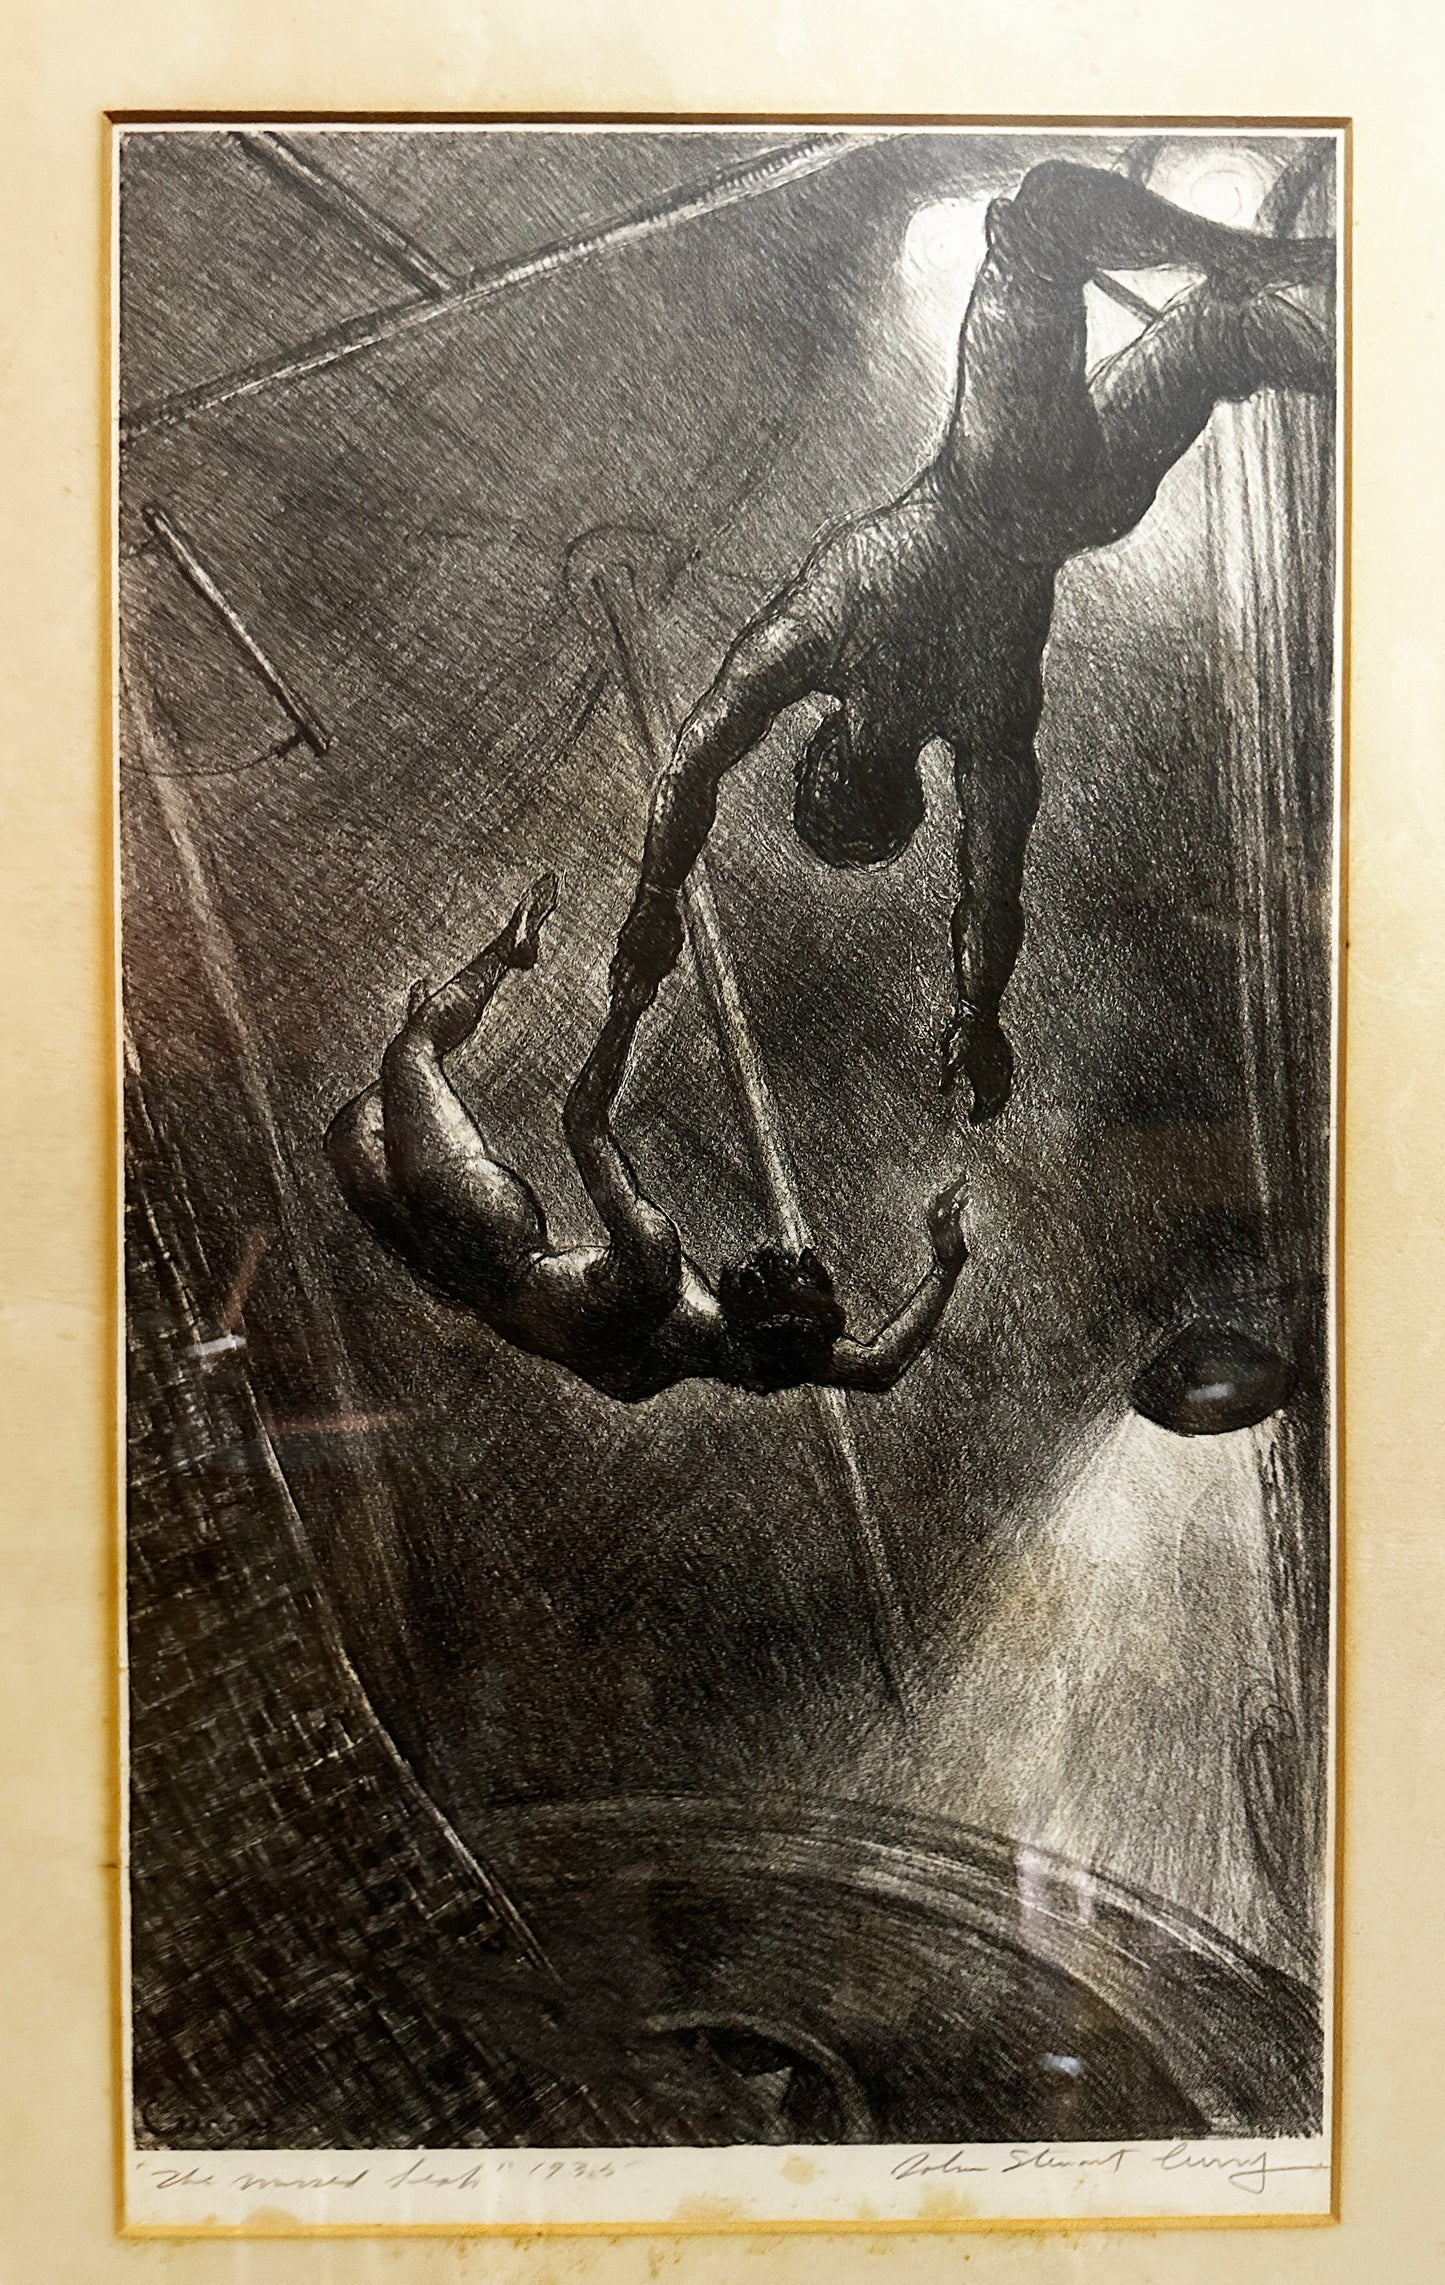 John Steuart Curry Lithograph: "The Missed Leap", 1935